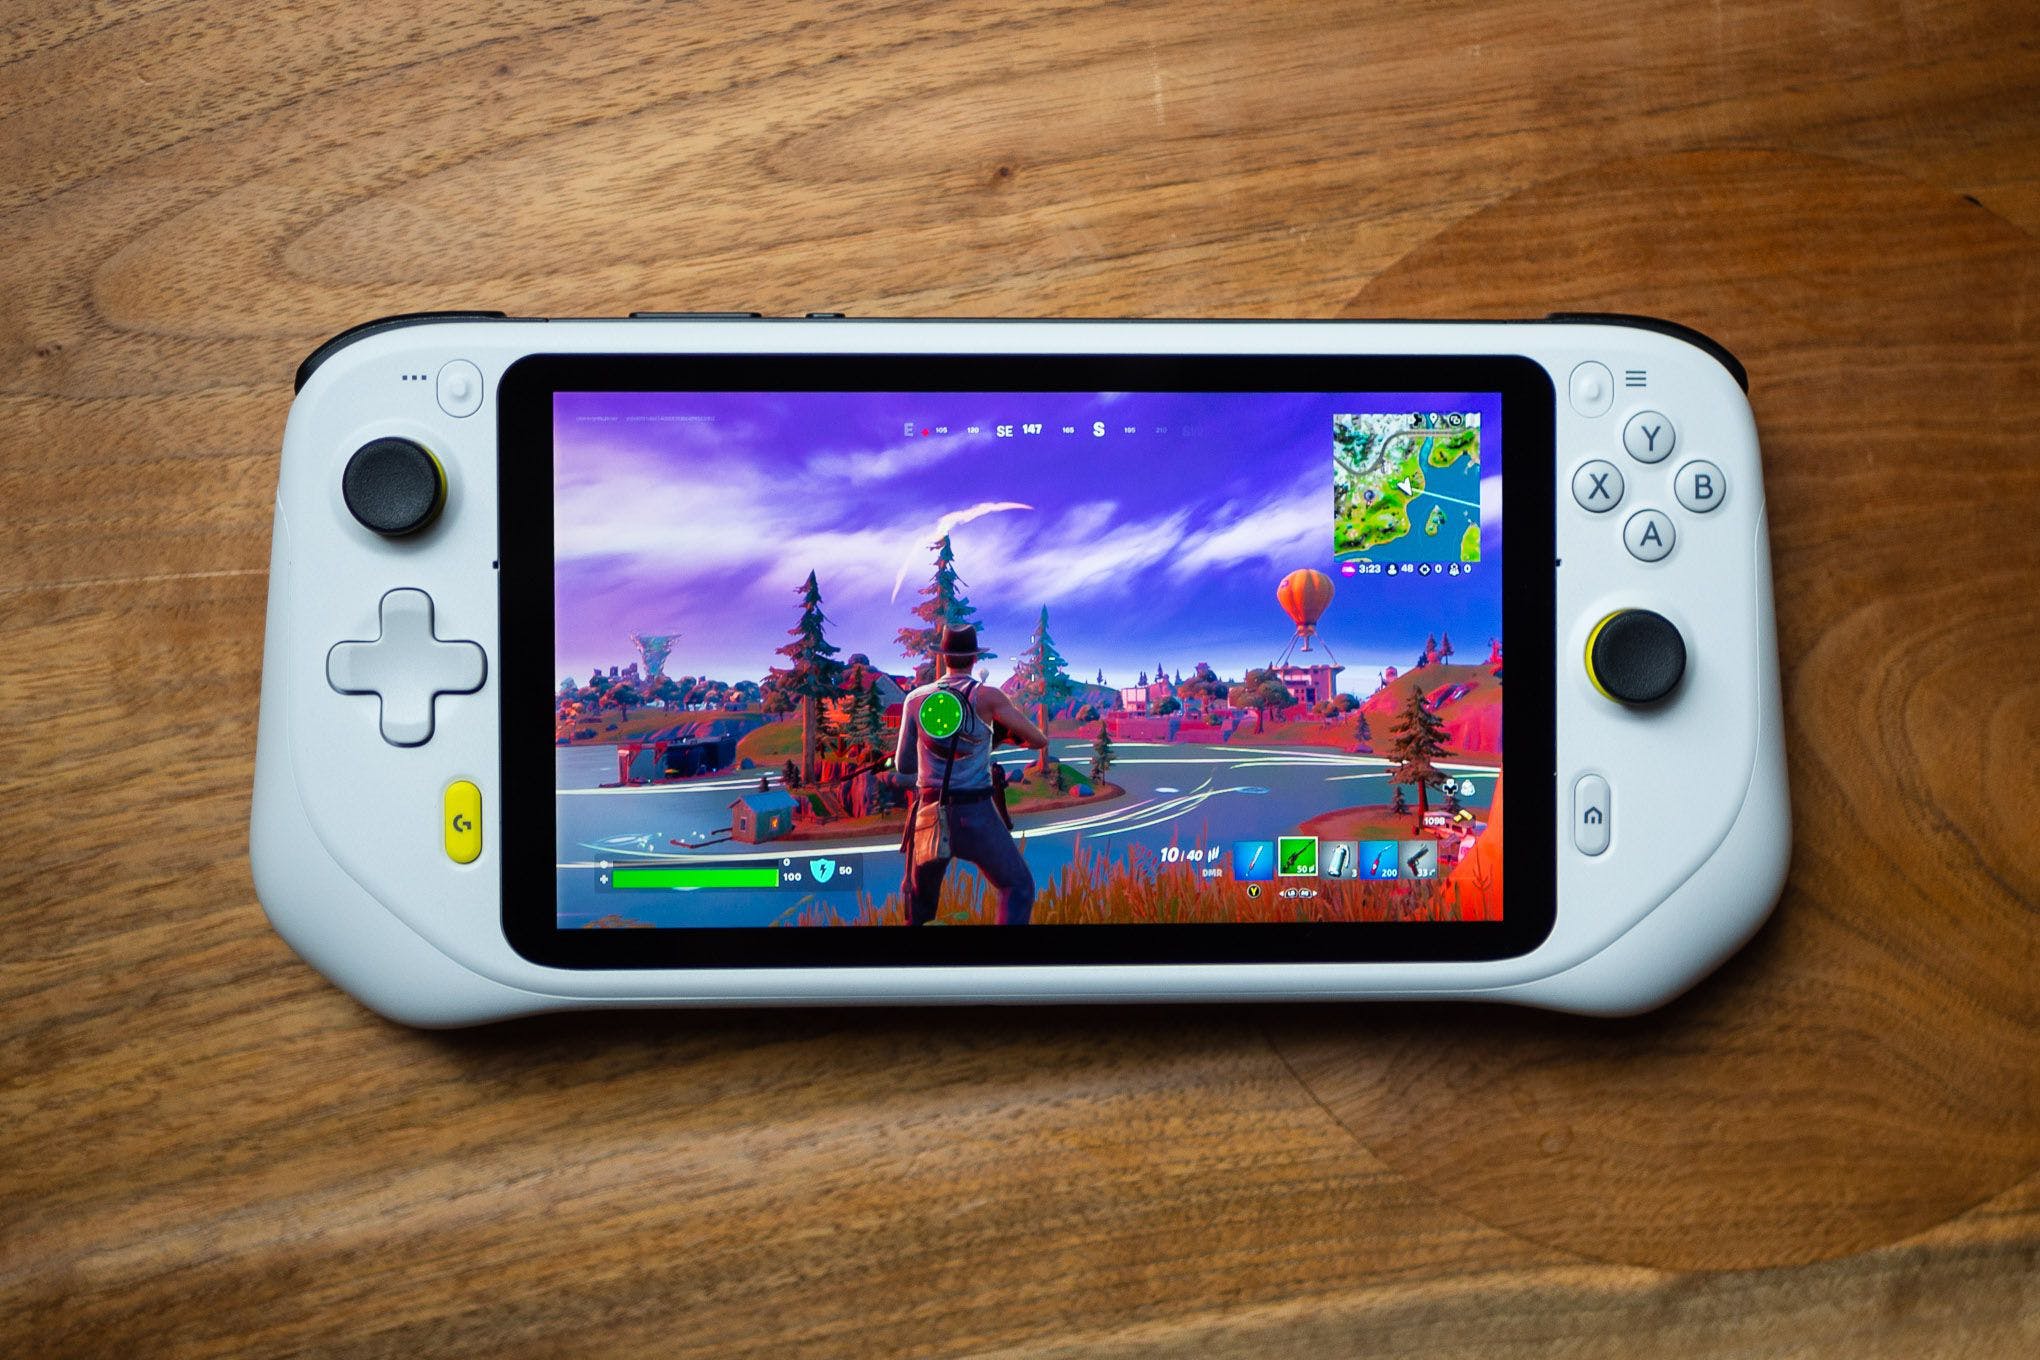 The Logitech G Cloud Gaming Handheld is shown running Fortnite over the cloud.